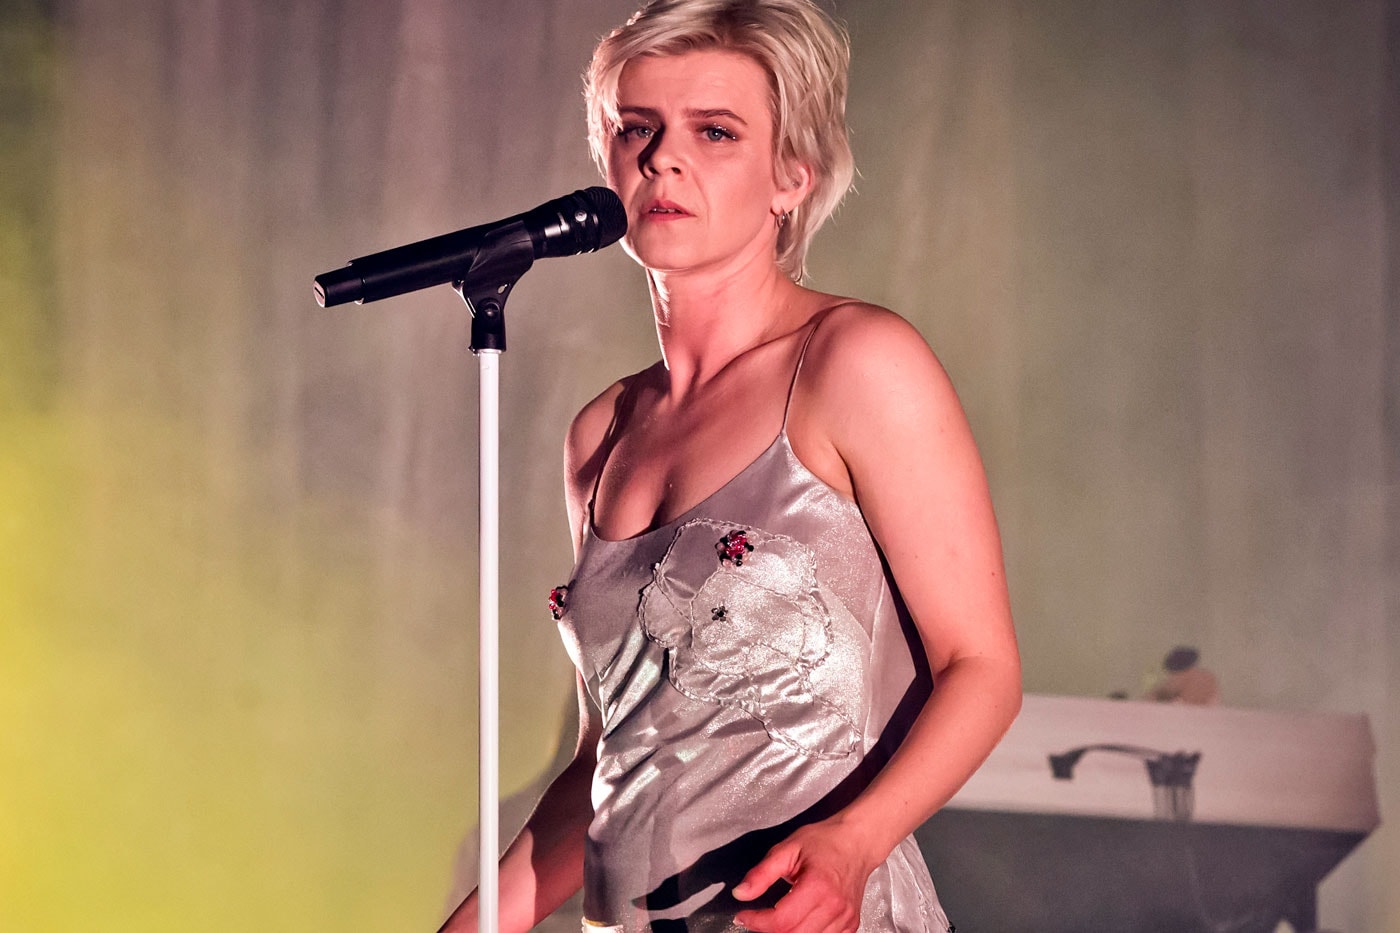 Three New Songs From Robyn 